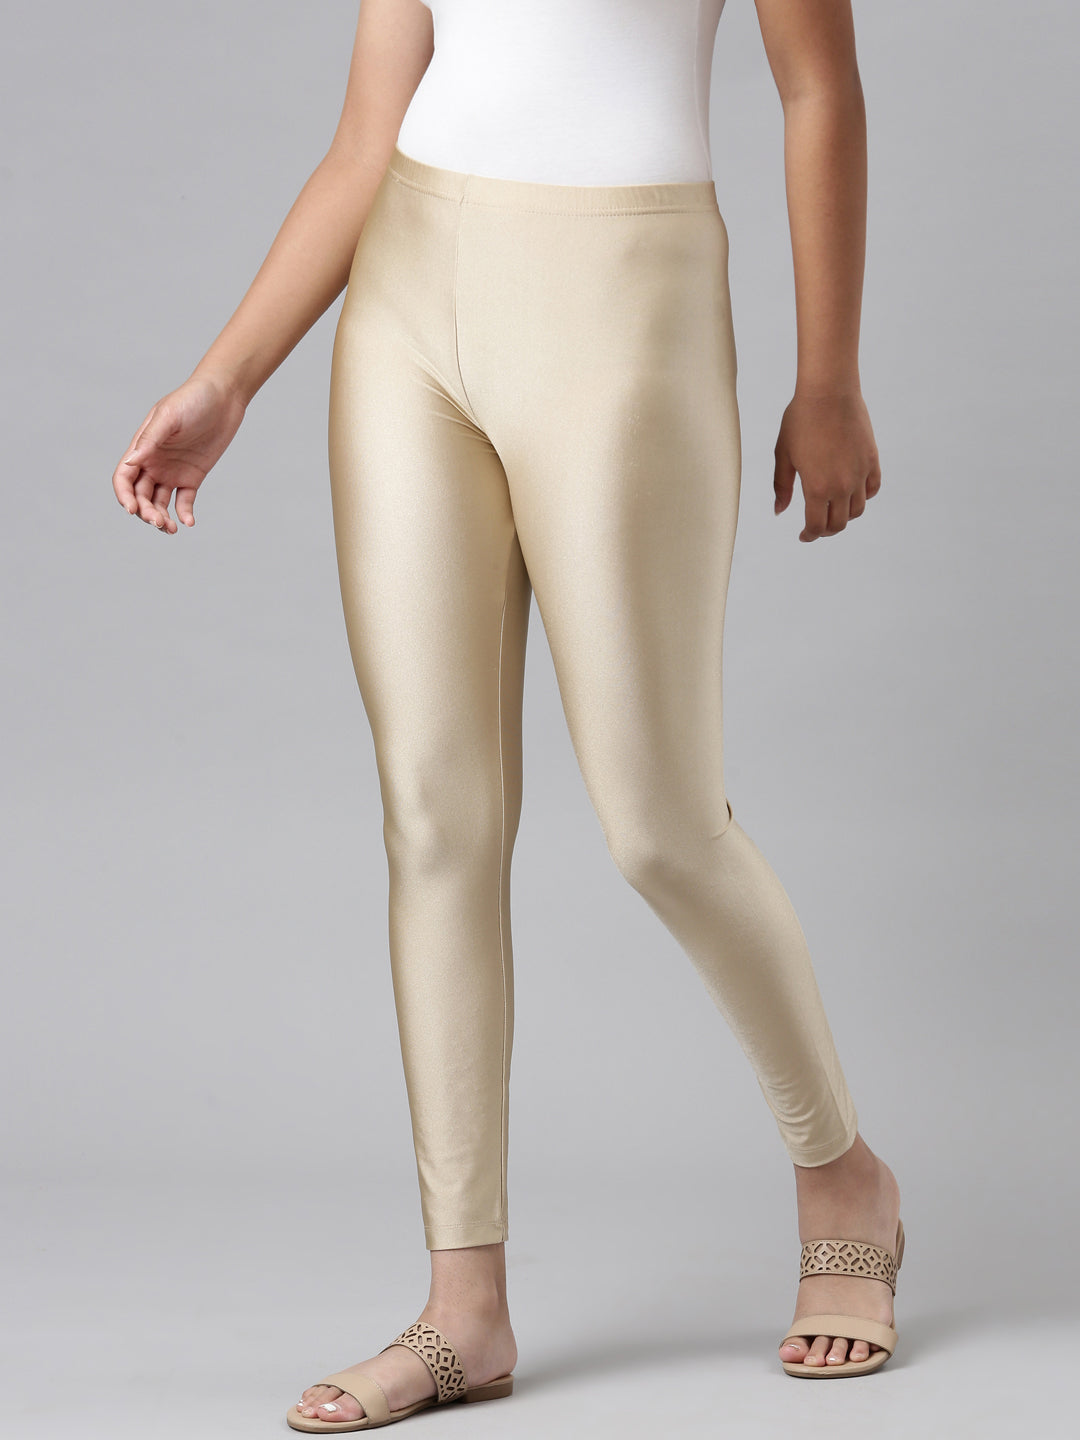 Go Colors - Style our versatile Metallic Pants with any Indian outfit. Go  grab yours today. Link: https://gocolors.com/products/women-gold-solid-mid-rise-metallic-pants?utm_source=Social&utm_medium=Stories&utm_campaign=GCxYou_30052022  #gocolors ...